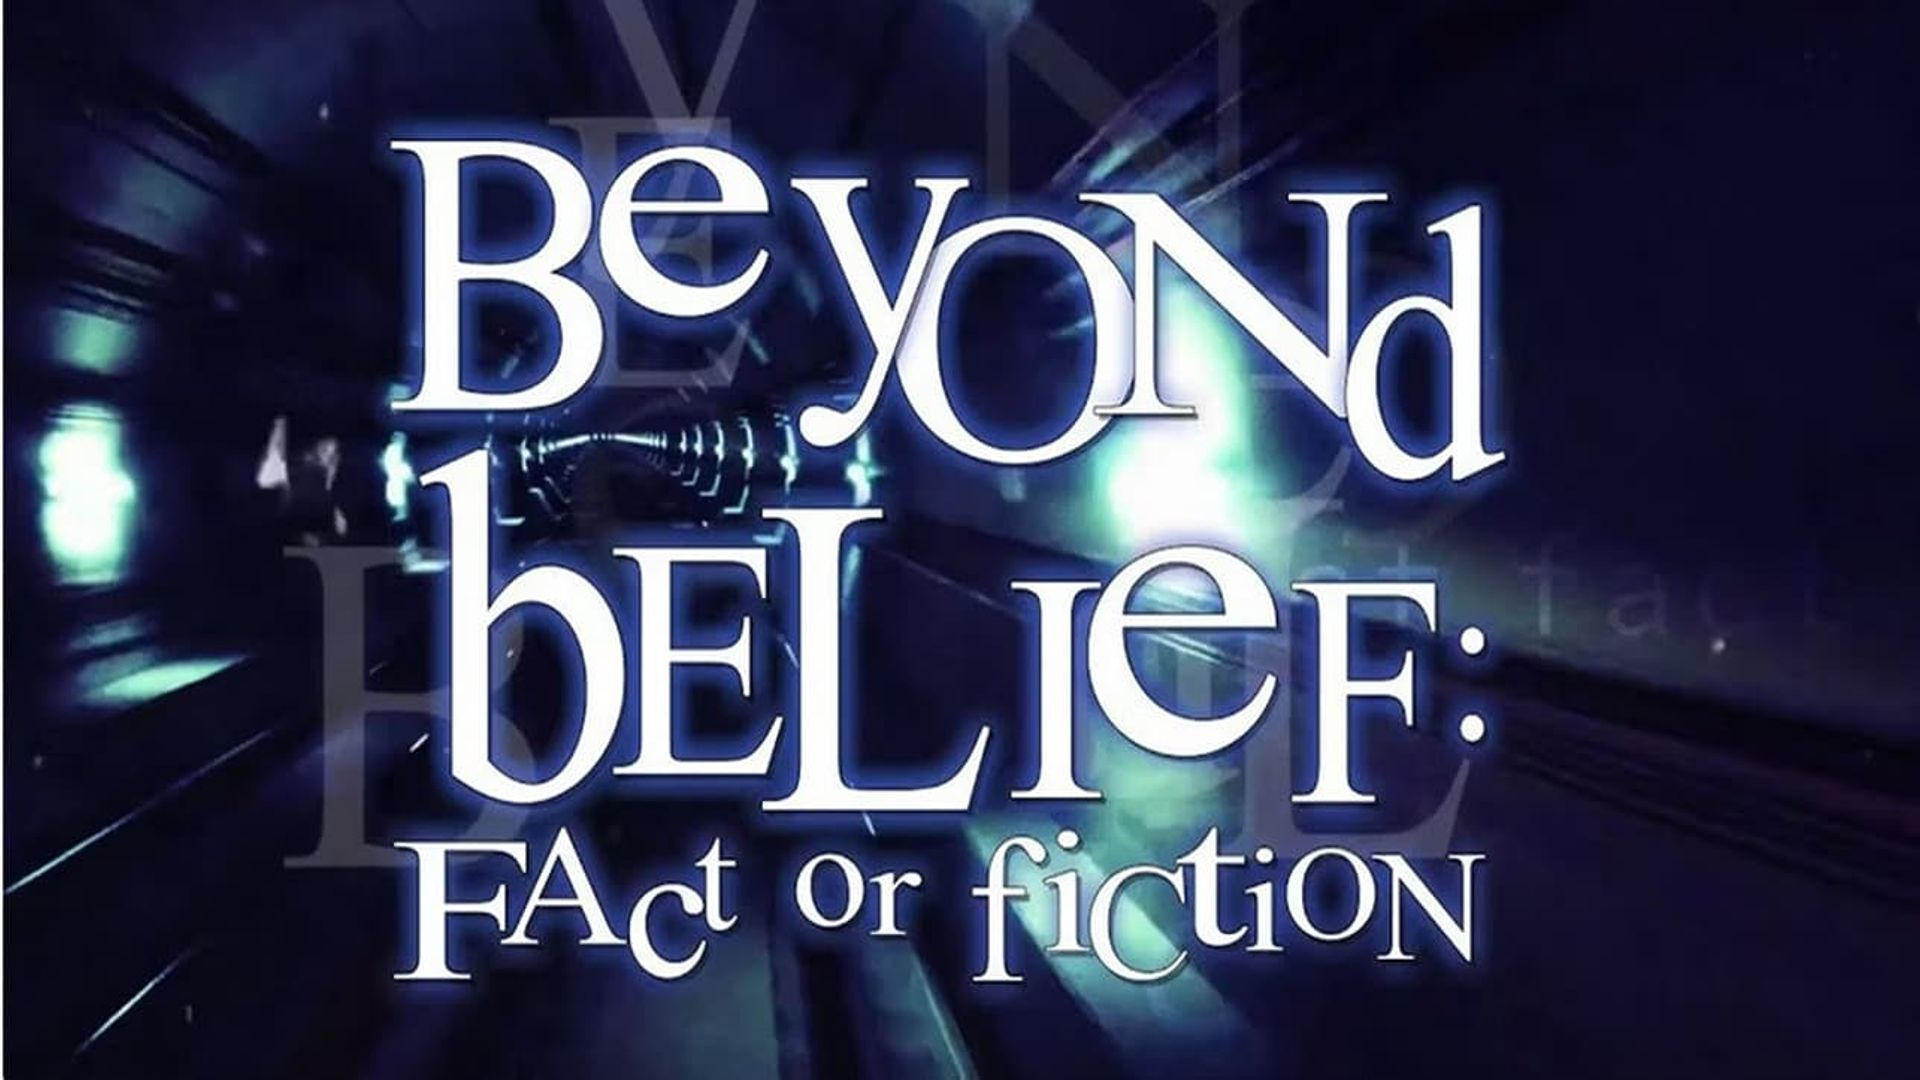 Beyond Belief: Fact or Fiction background